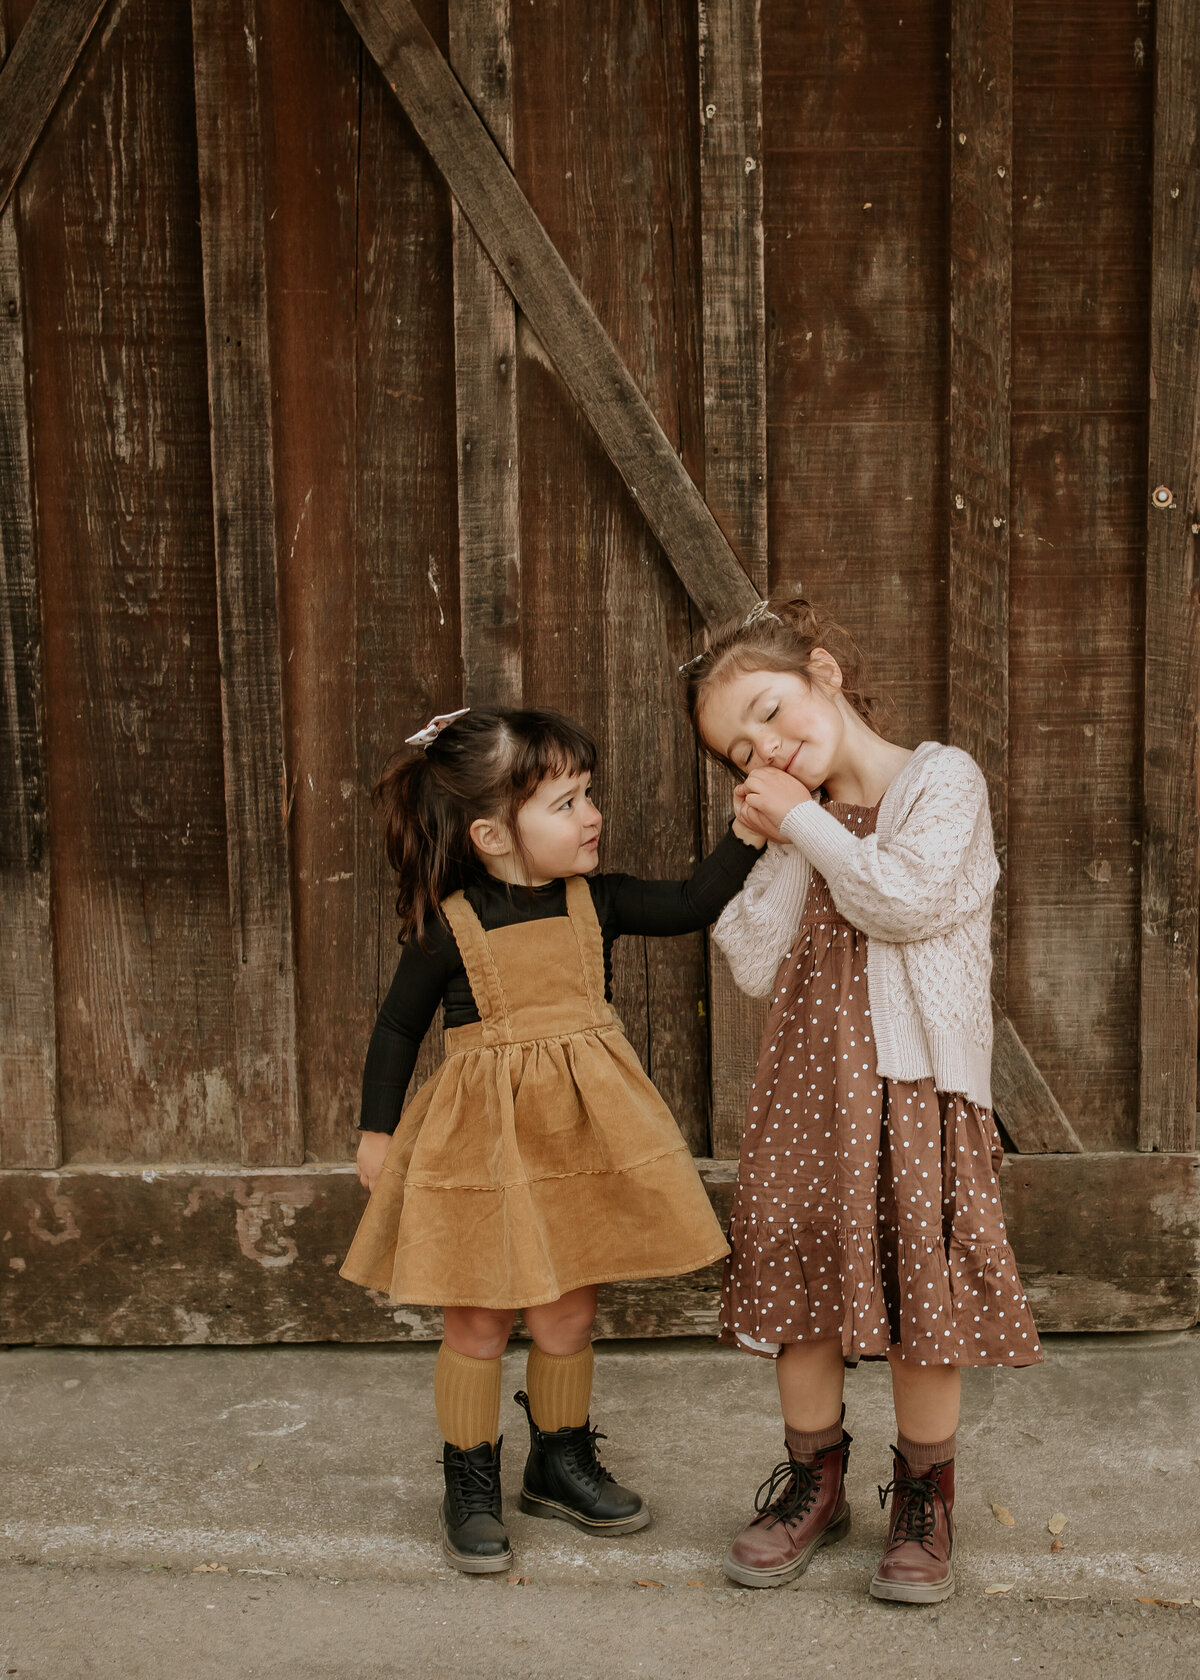 Sister portrait in front of barn. Older sister holds younger sister's hand to cheek.